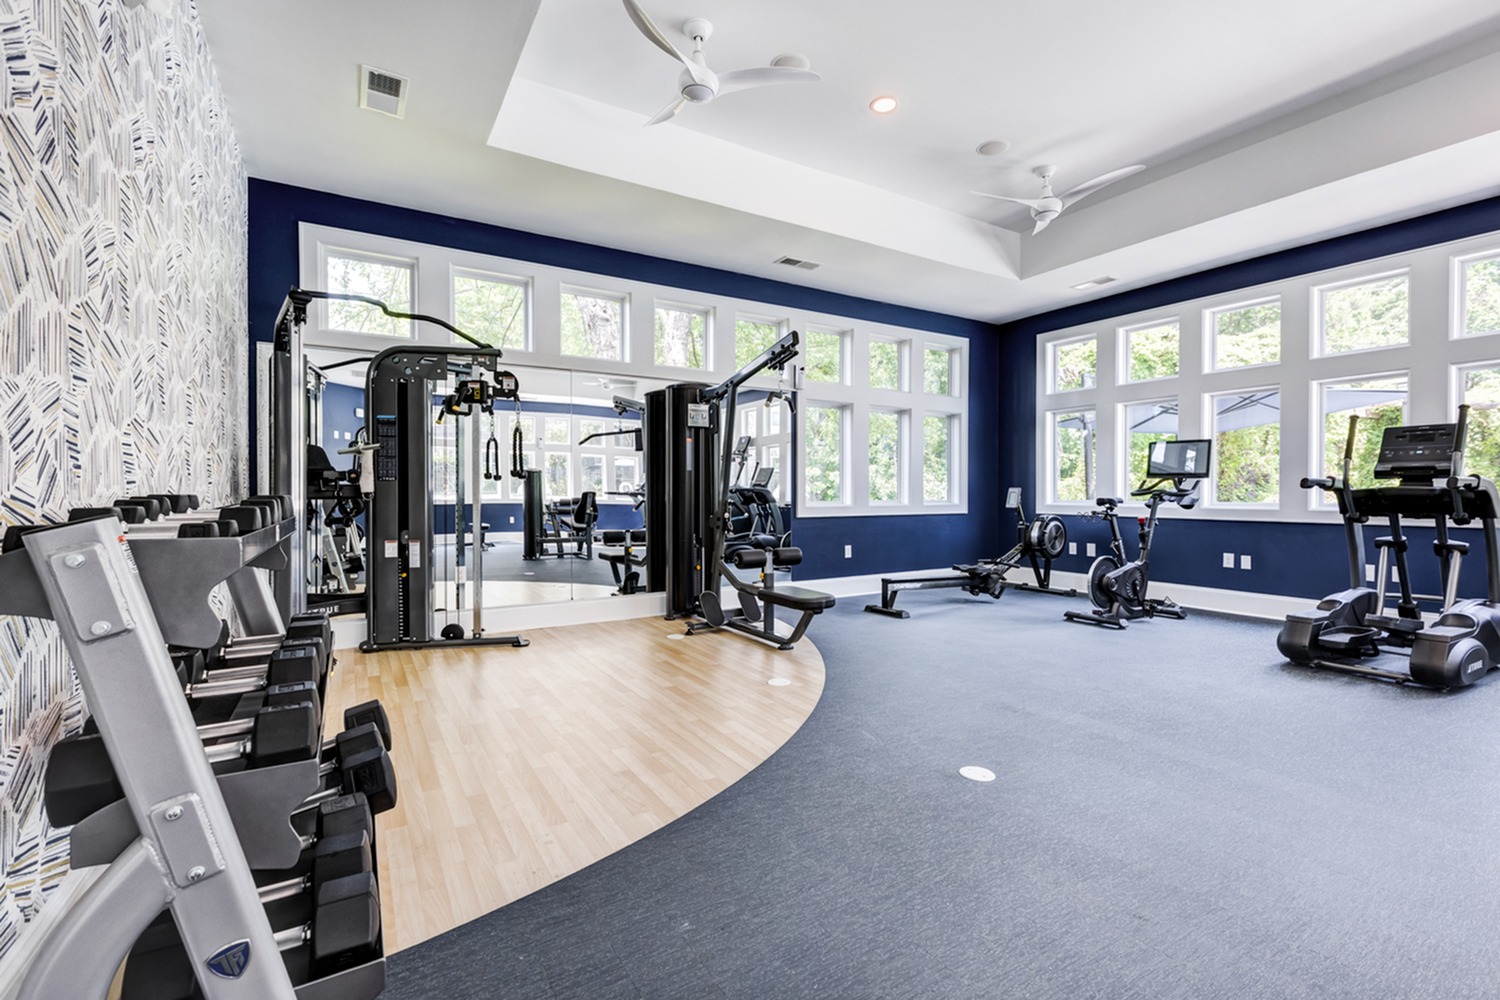 24-hour fitness center with cardio, resistance training, and free weights